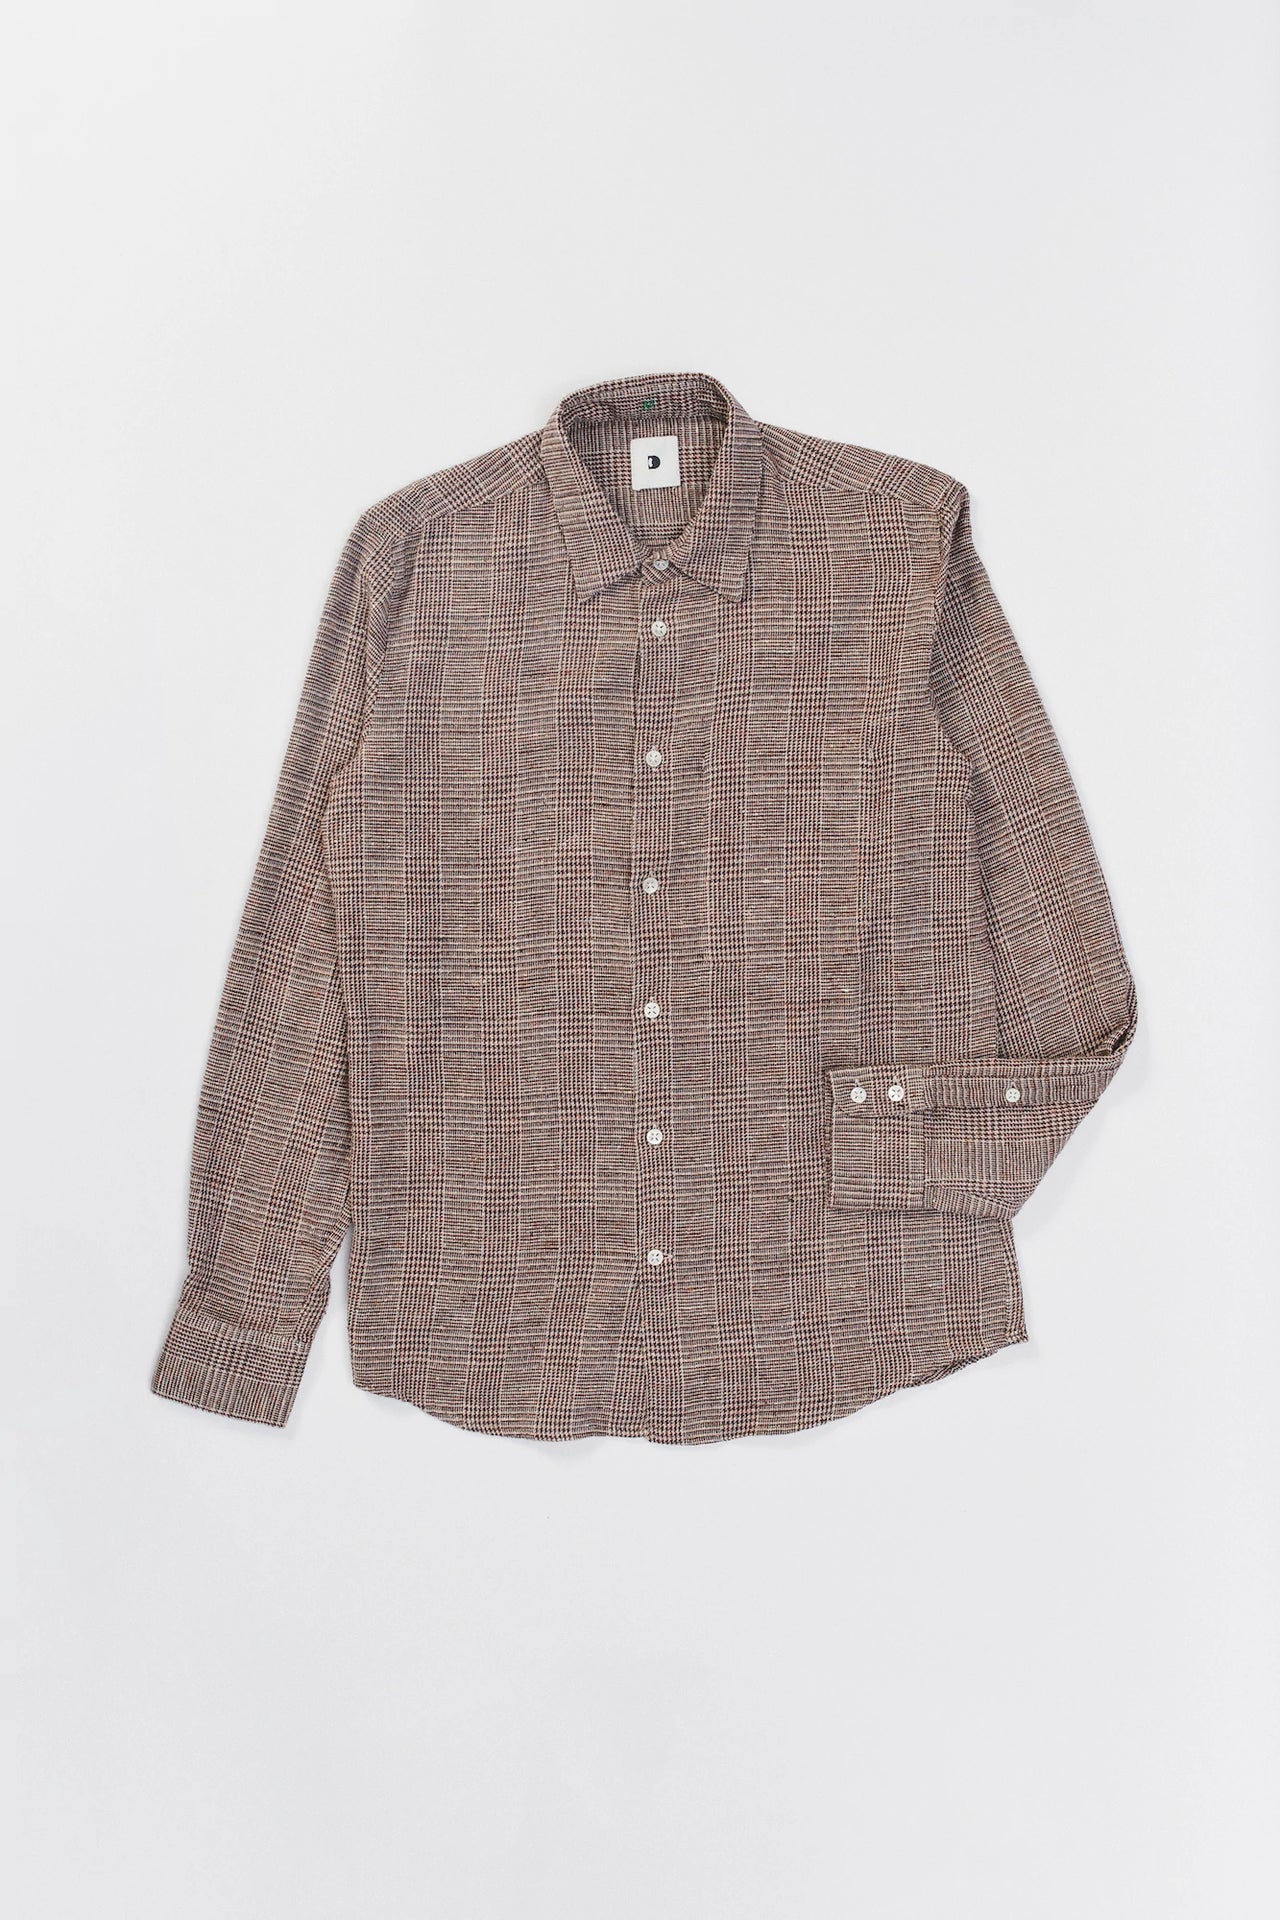 Feel Good Shirt in a Beige Brown Italian Cotton, Silk and Wool Blend with a Prince of Wales Pattern